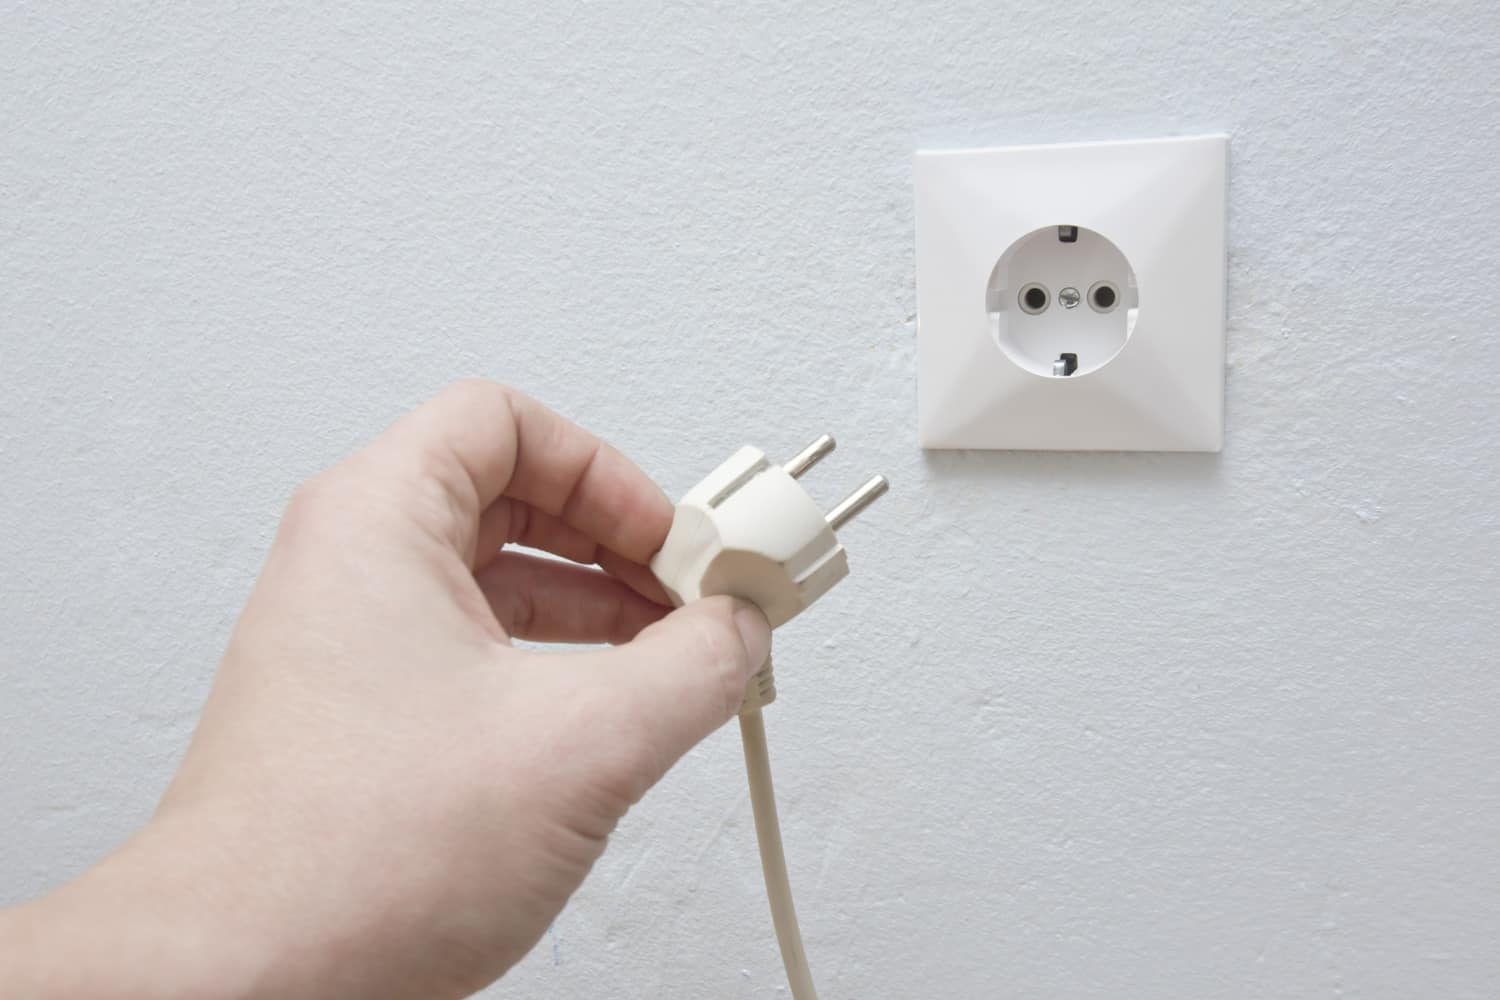 hand holding power cable in front of wall outlet